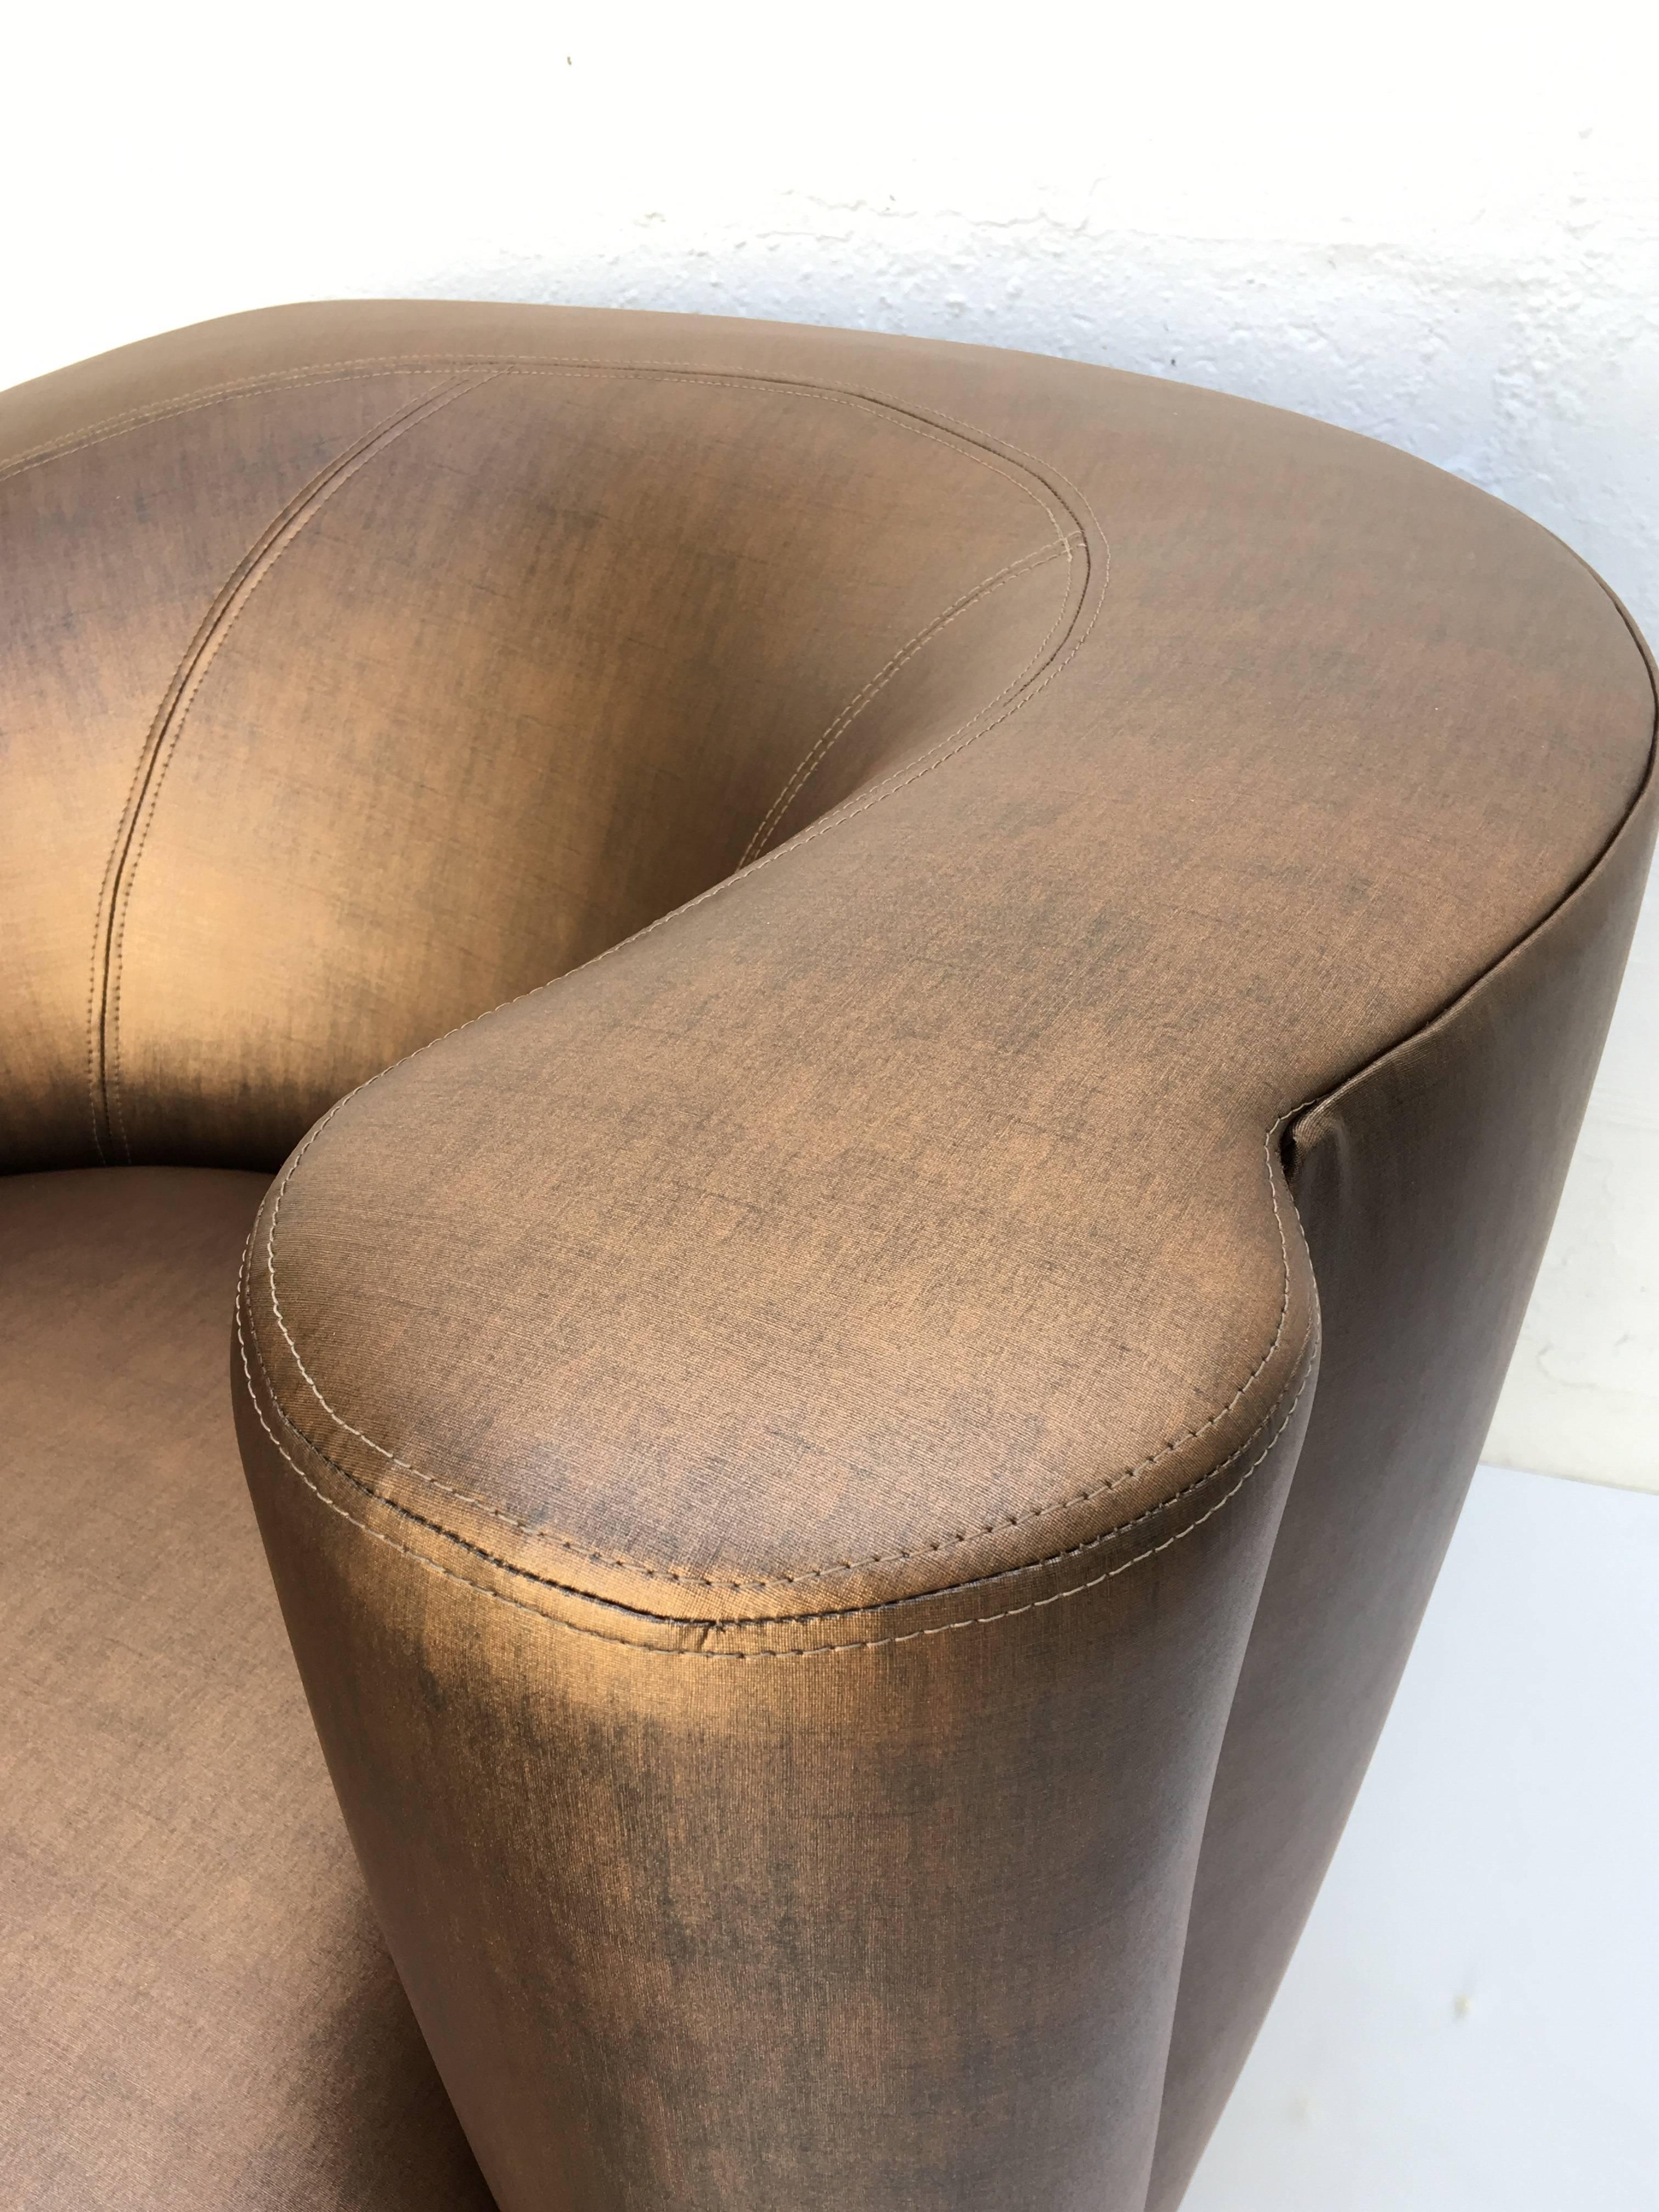 Late 20th Century Pair of Swivel Lounge Chairs and Ottomans by Vladimir Kagan 1927-2016